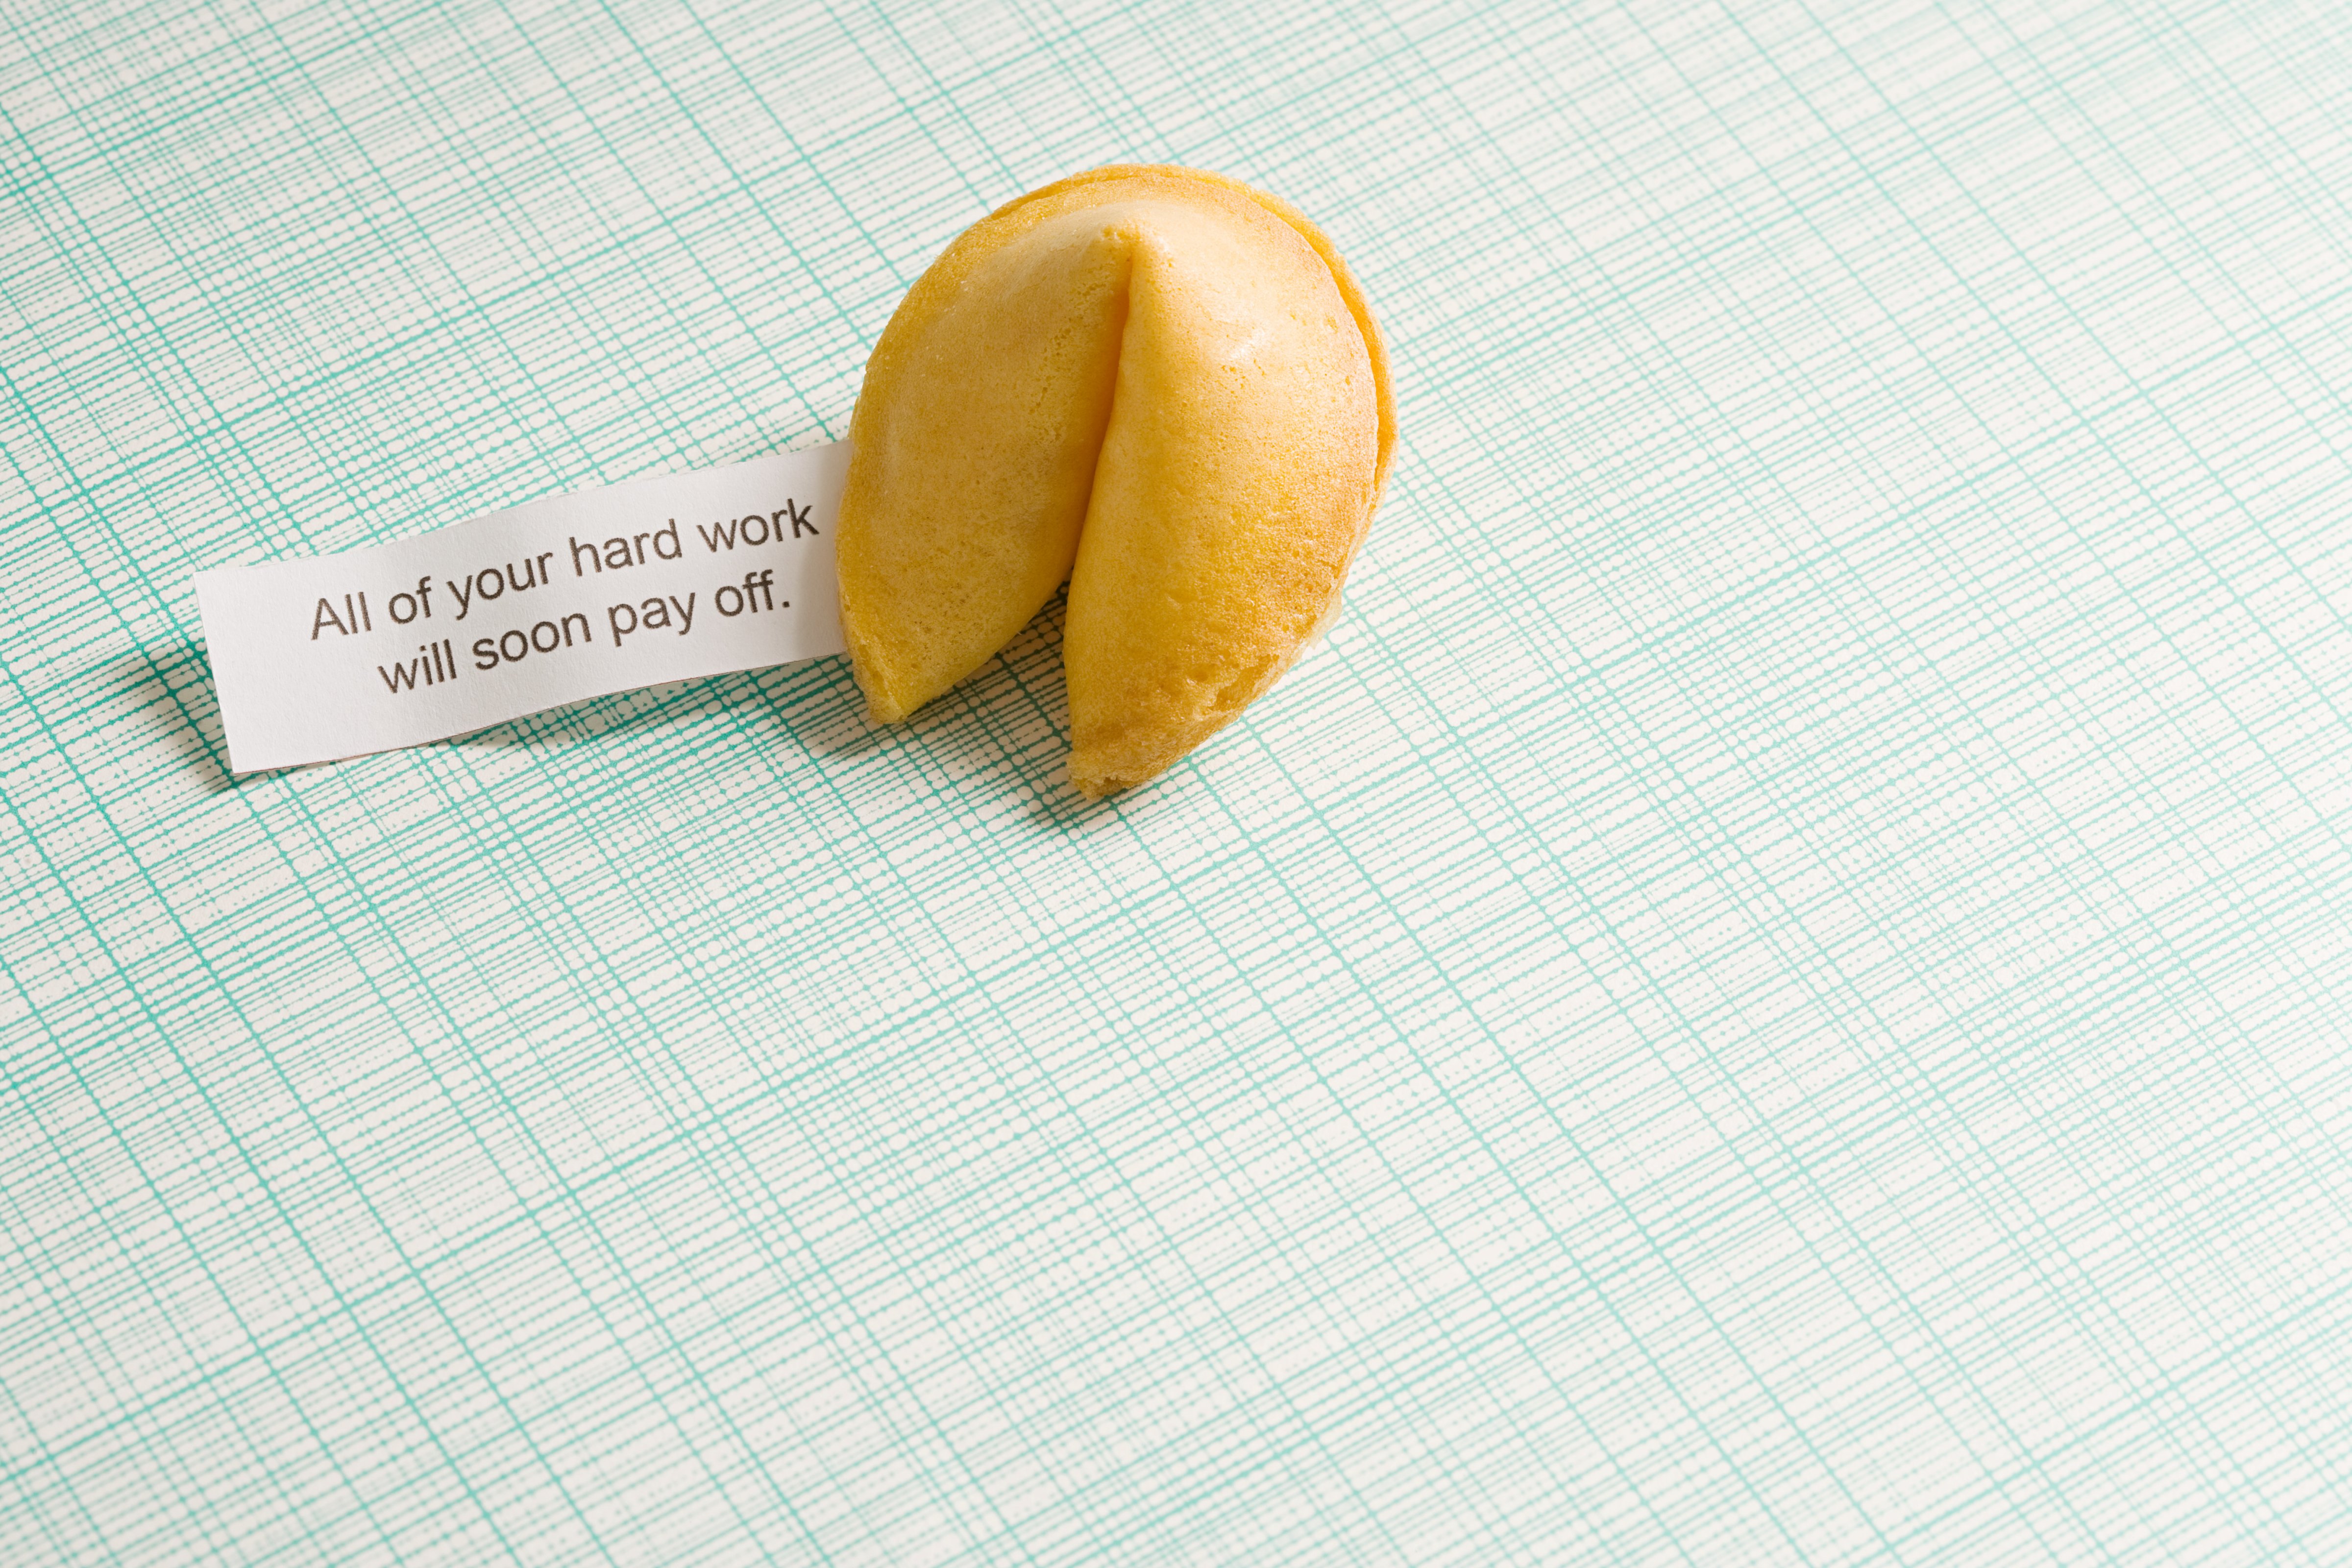 Fortune cookie (Getty Images)